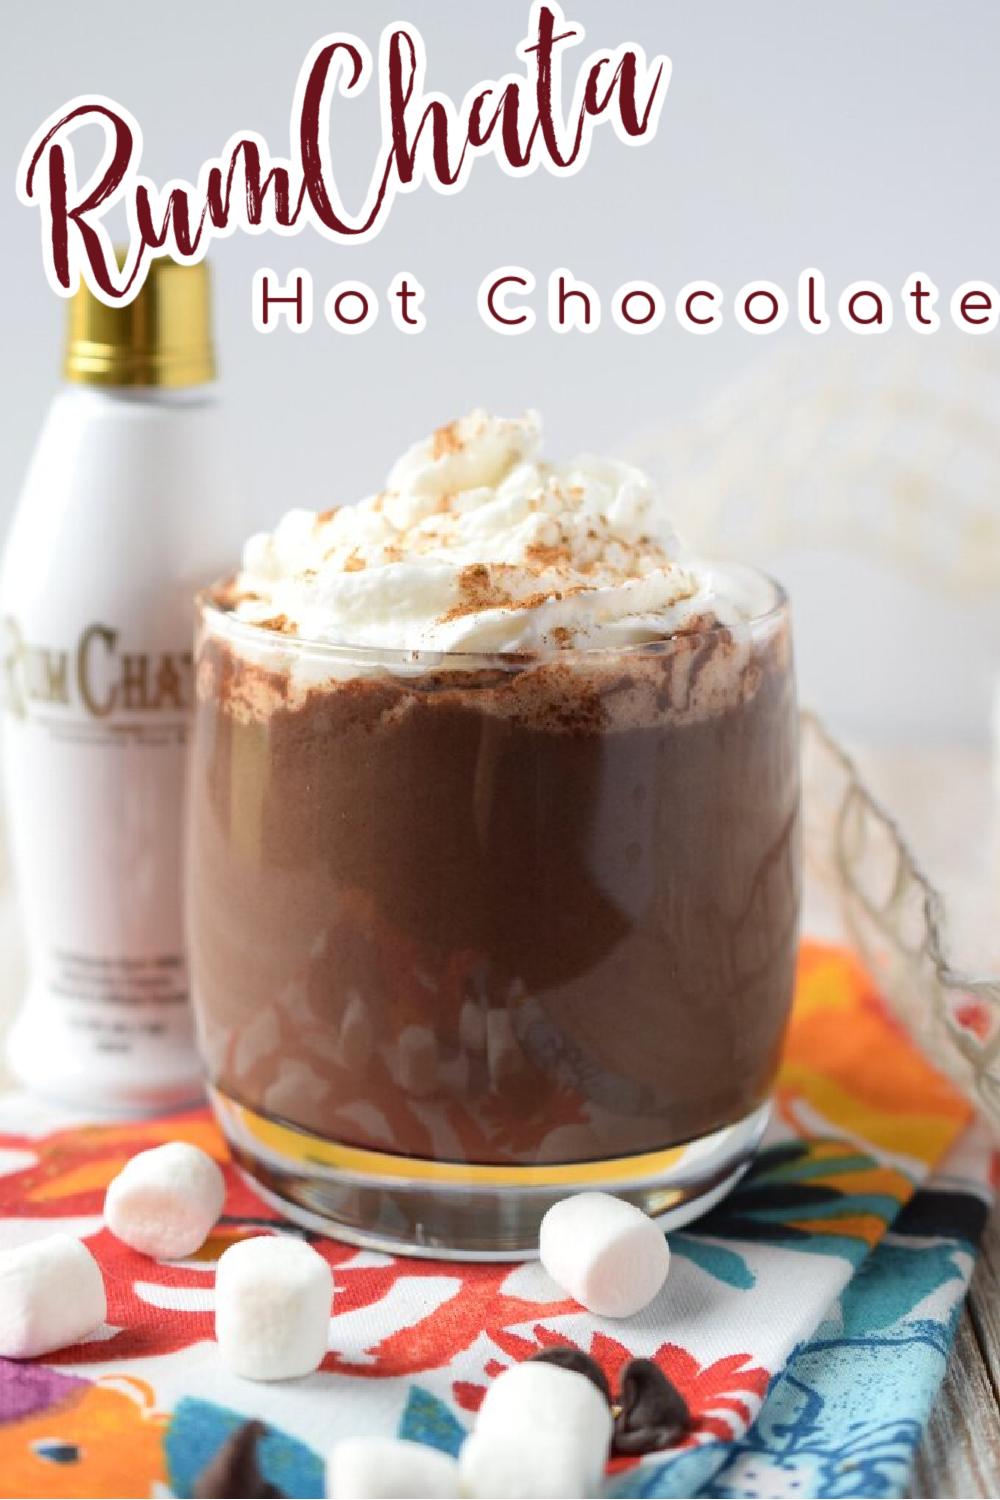 RumChata Hot Chocolate - Take your hot chocolate to the next level by adding RumChata! Made with just 4 simple ingredients in 10 minutes! Hot Chocolate Recipes | RumChata Recipes | Boozy Hot Chocolate